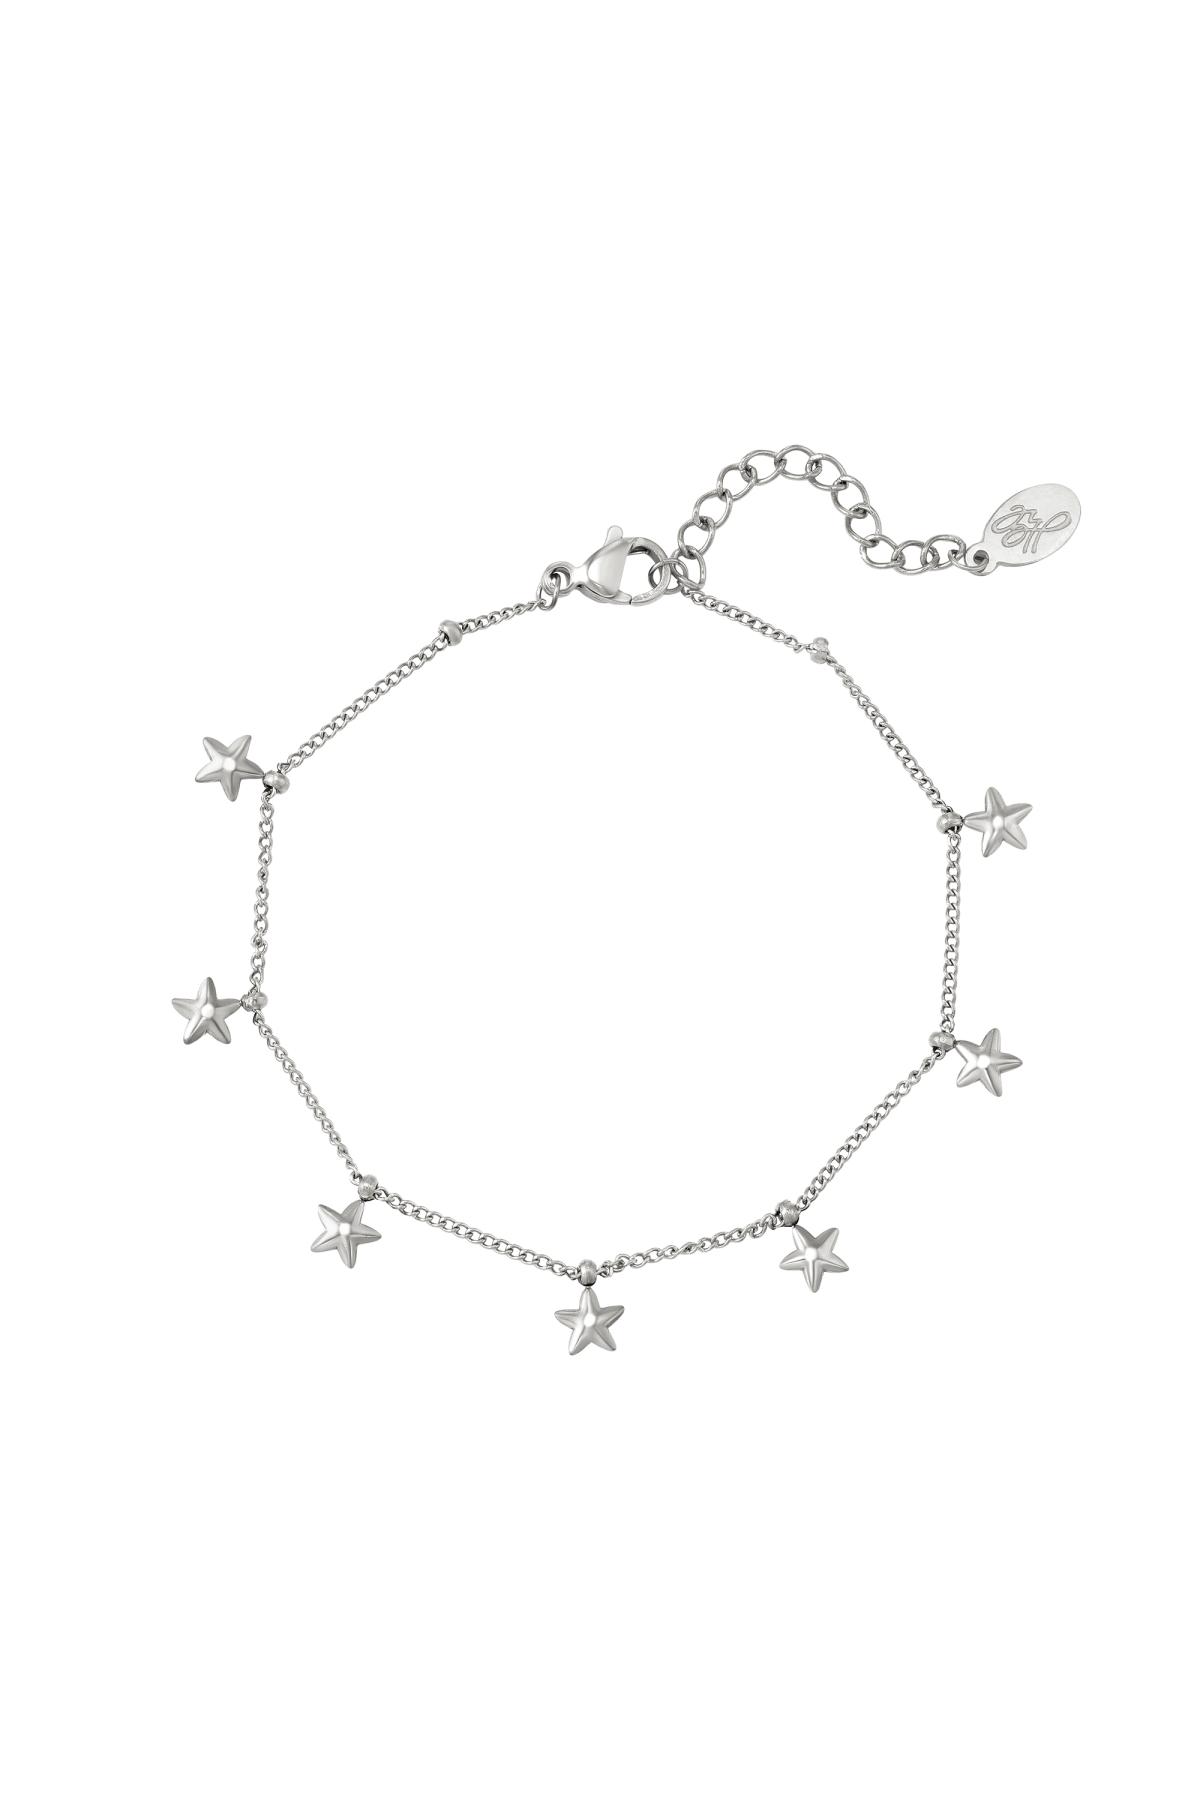 Bracelet star charms Silver Stainless Steel h5 